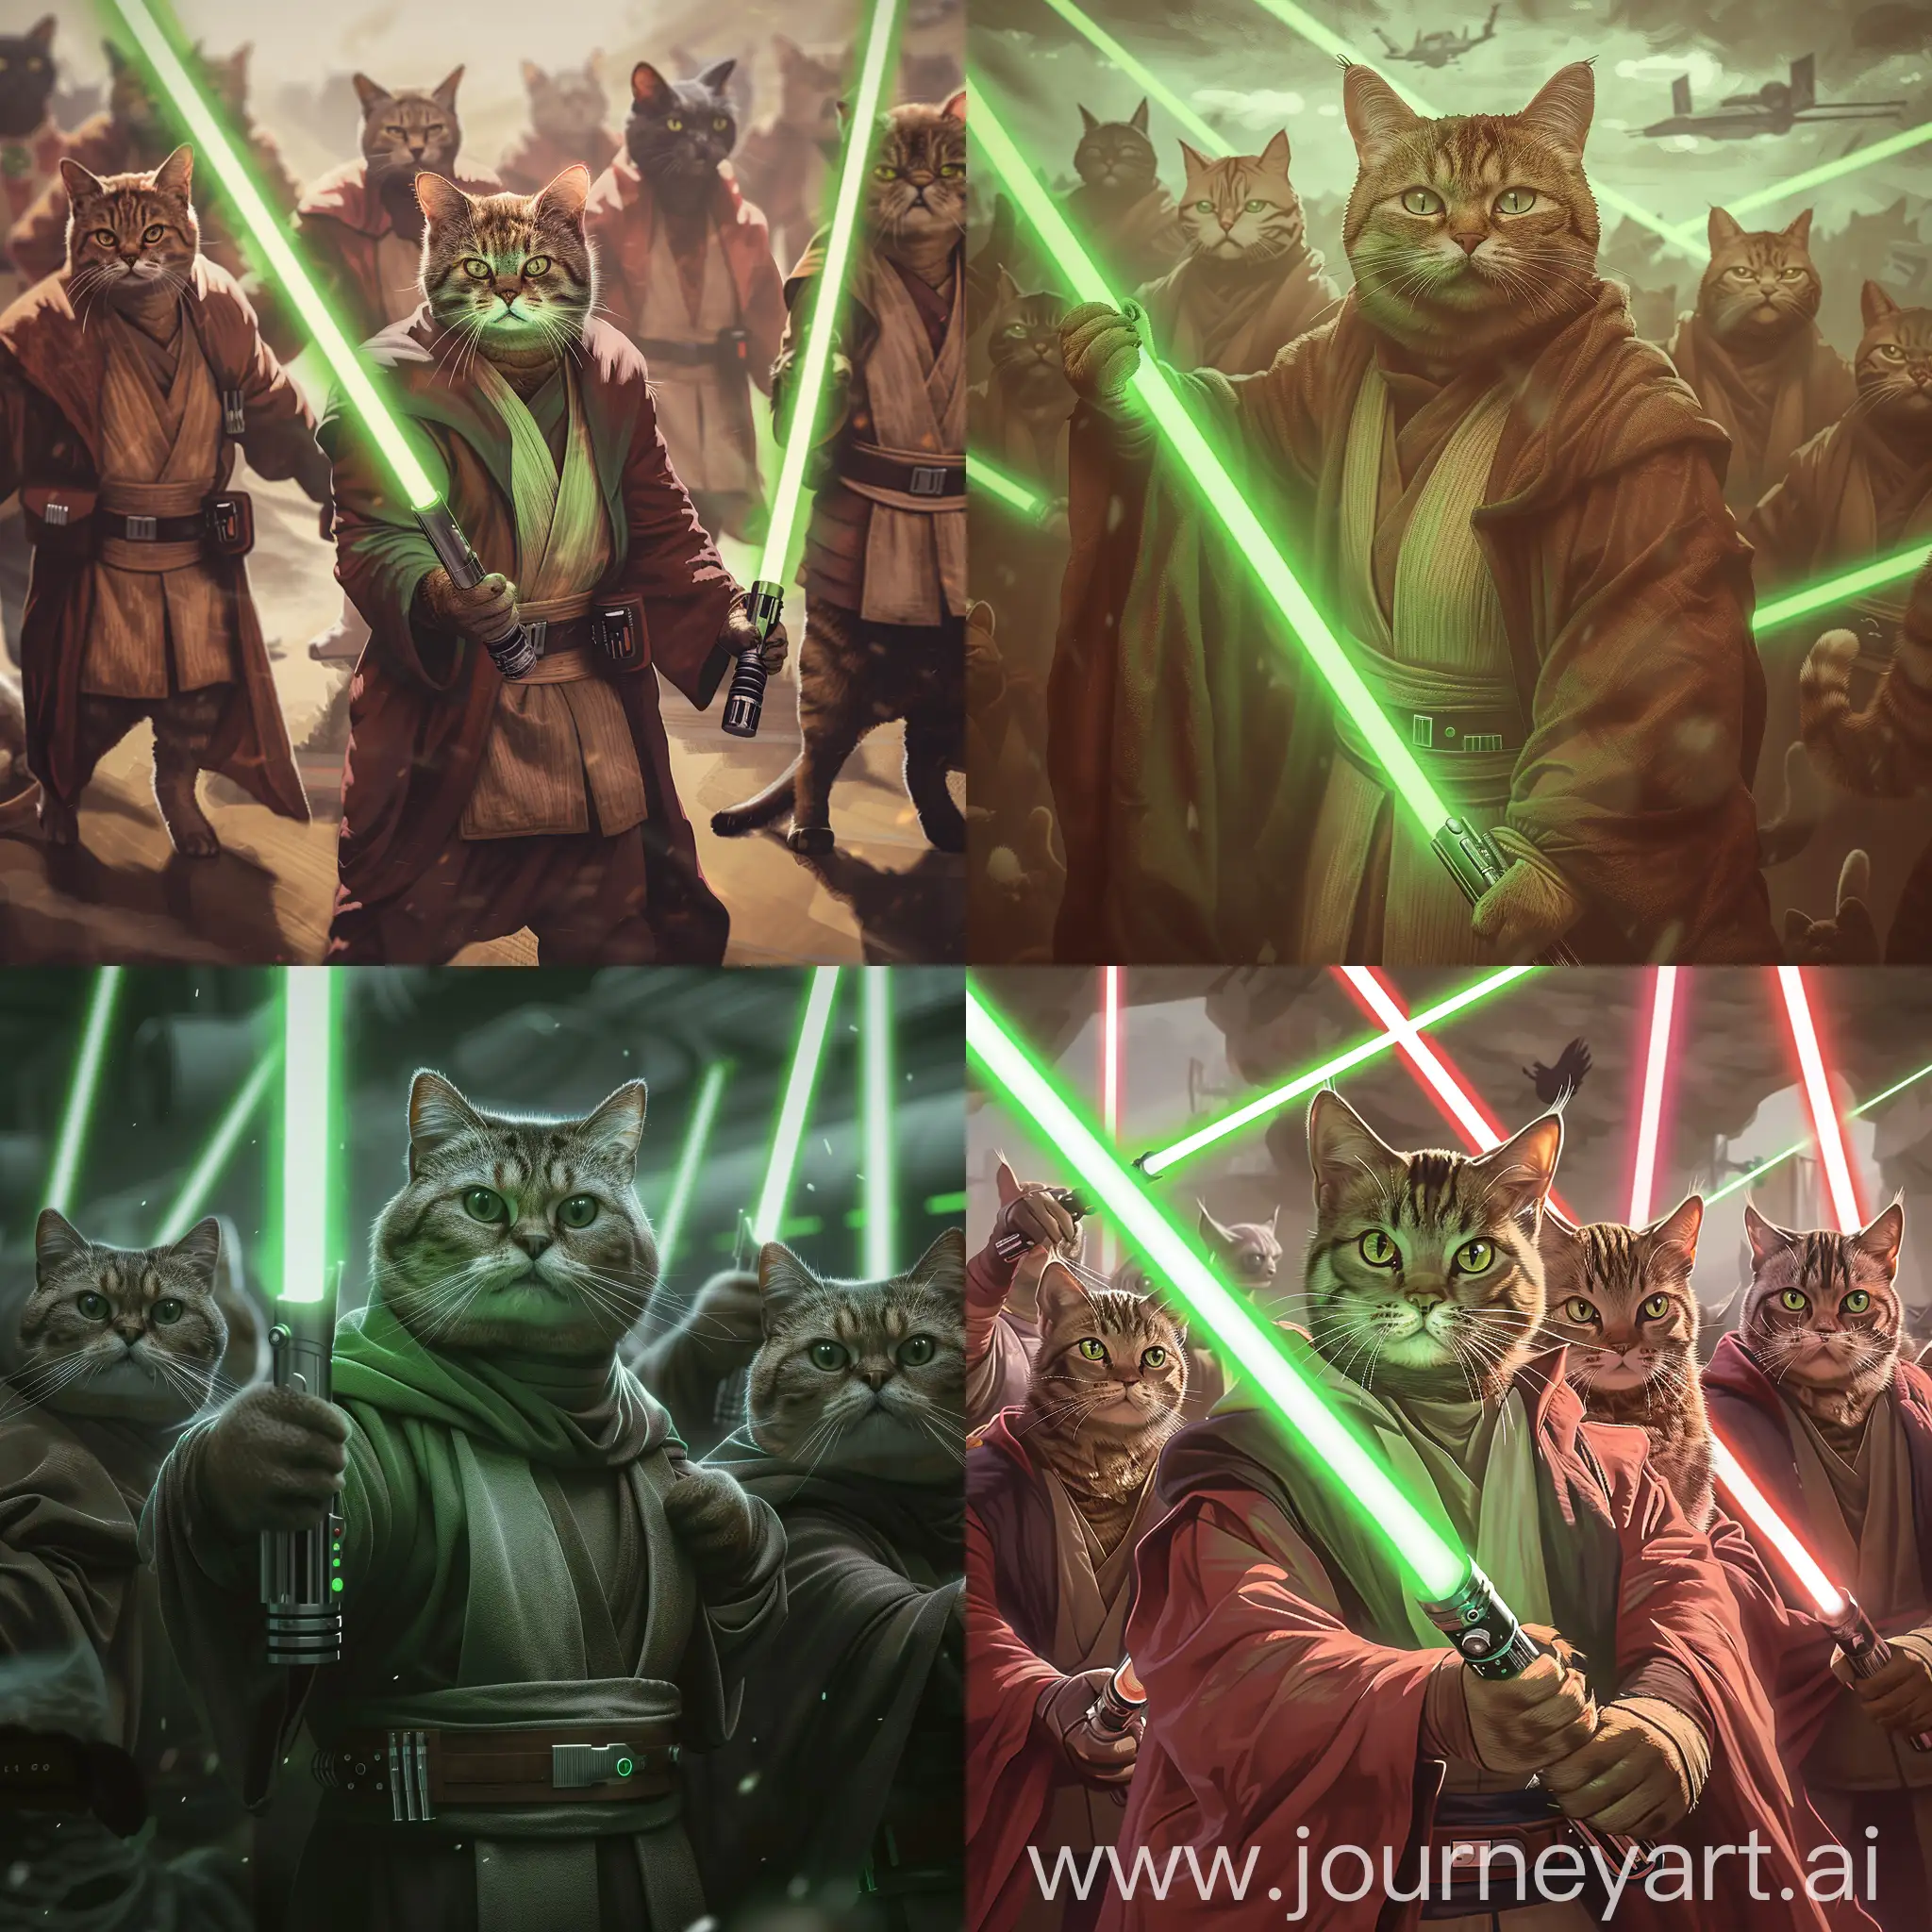 Humorous-Humanoid-Cats-in-Jedi-Costumes-with-Green-Lightsabers